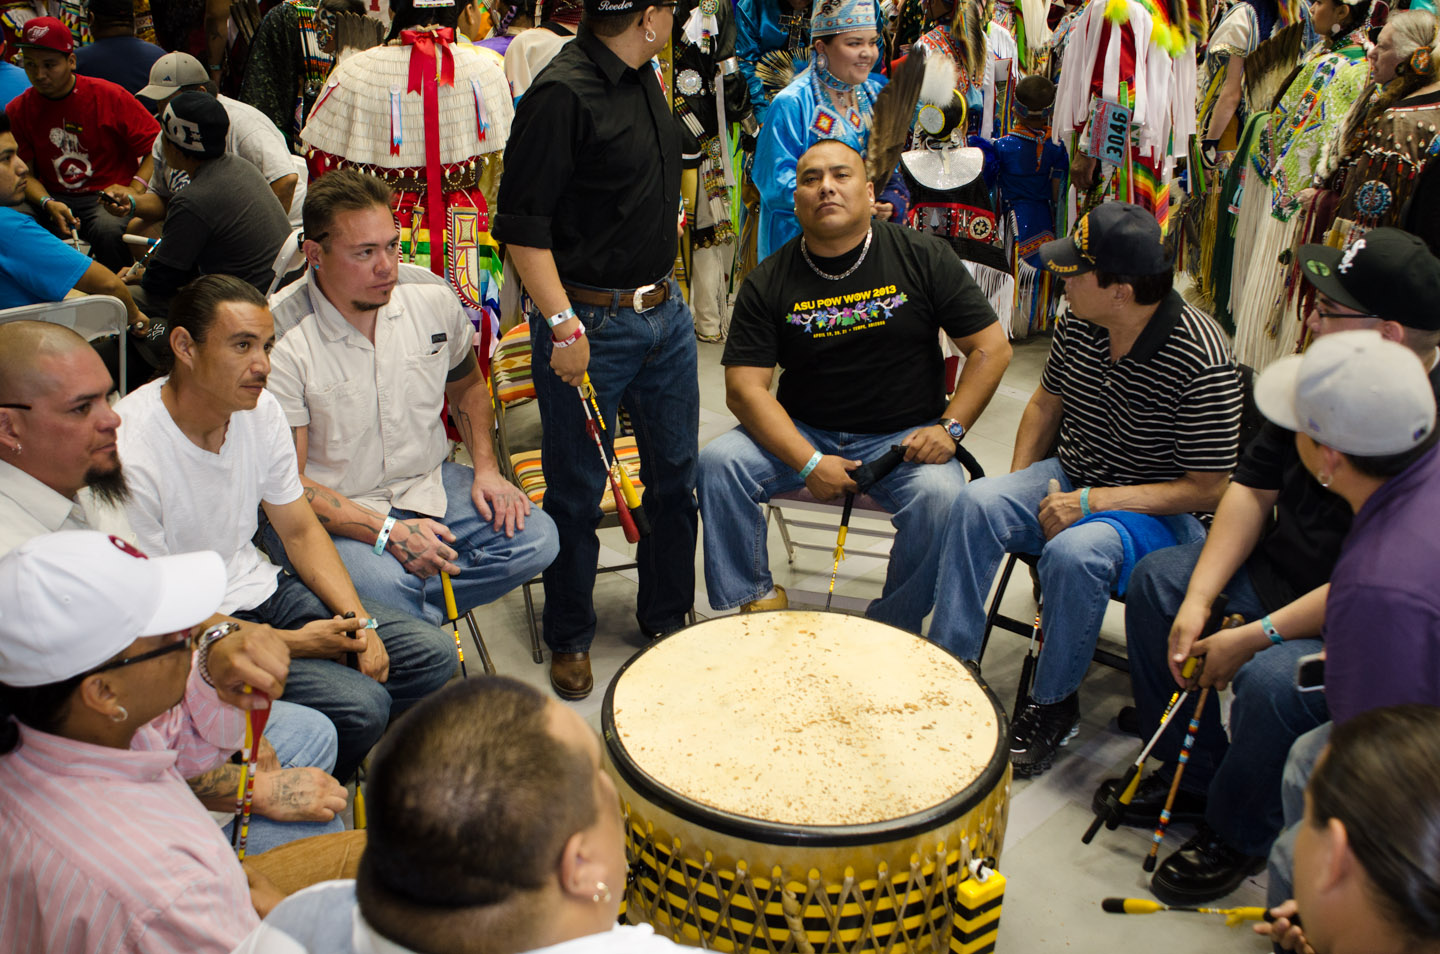 Yellow Jacket set up a new drum during the powwow.